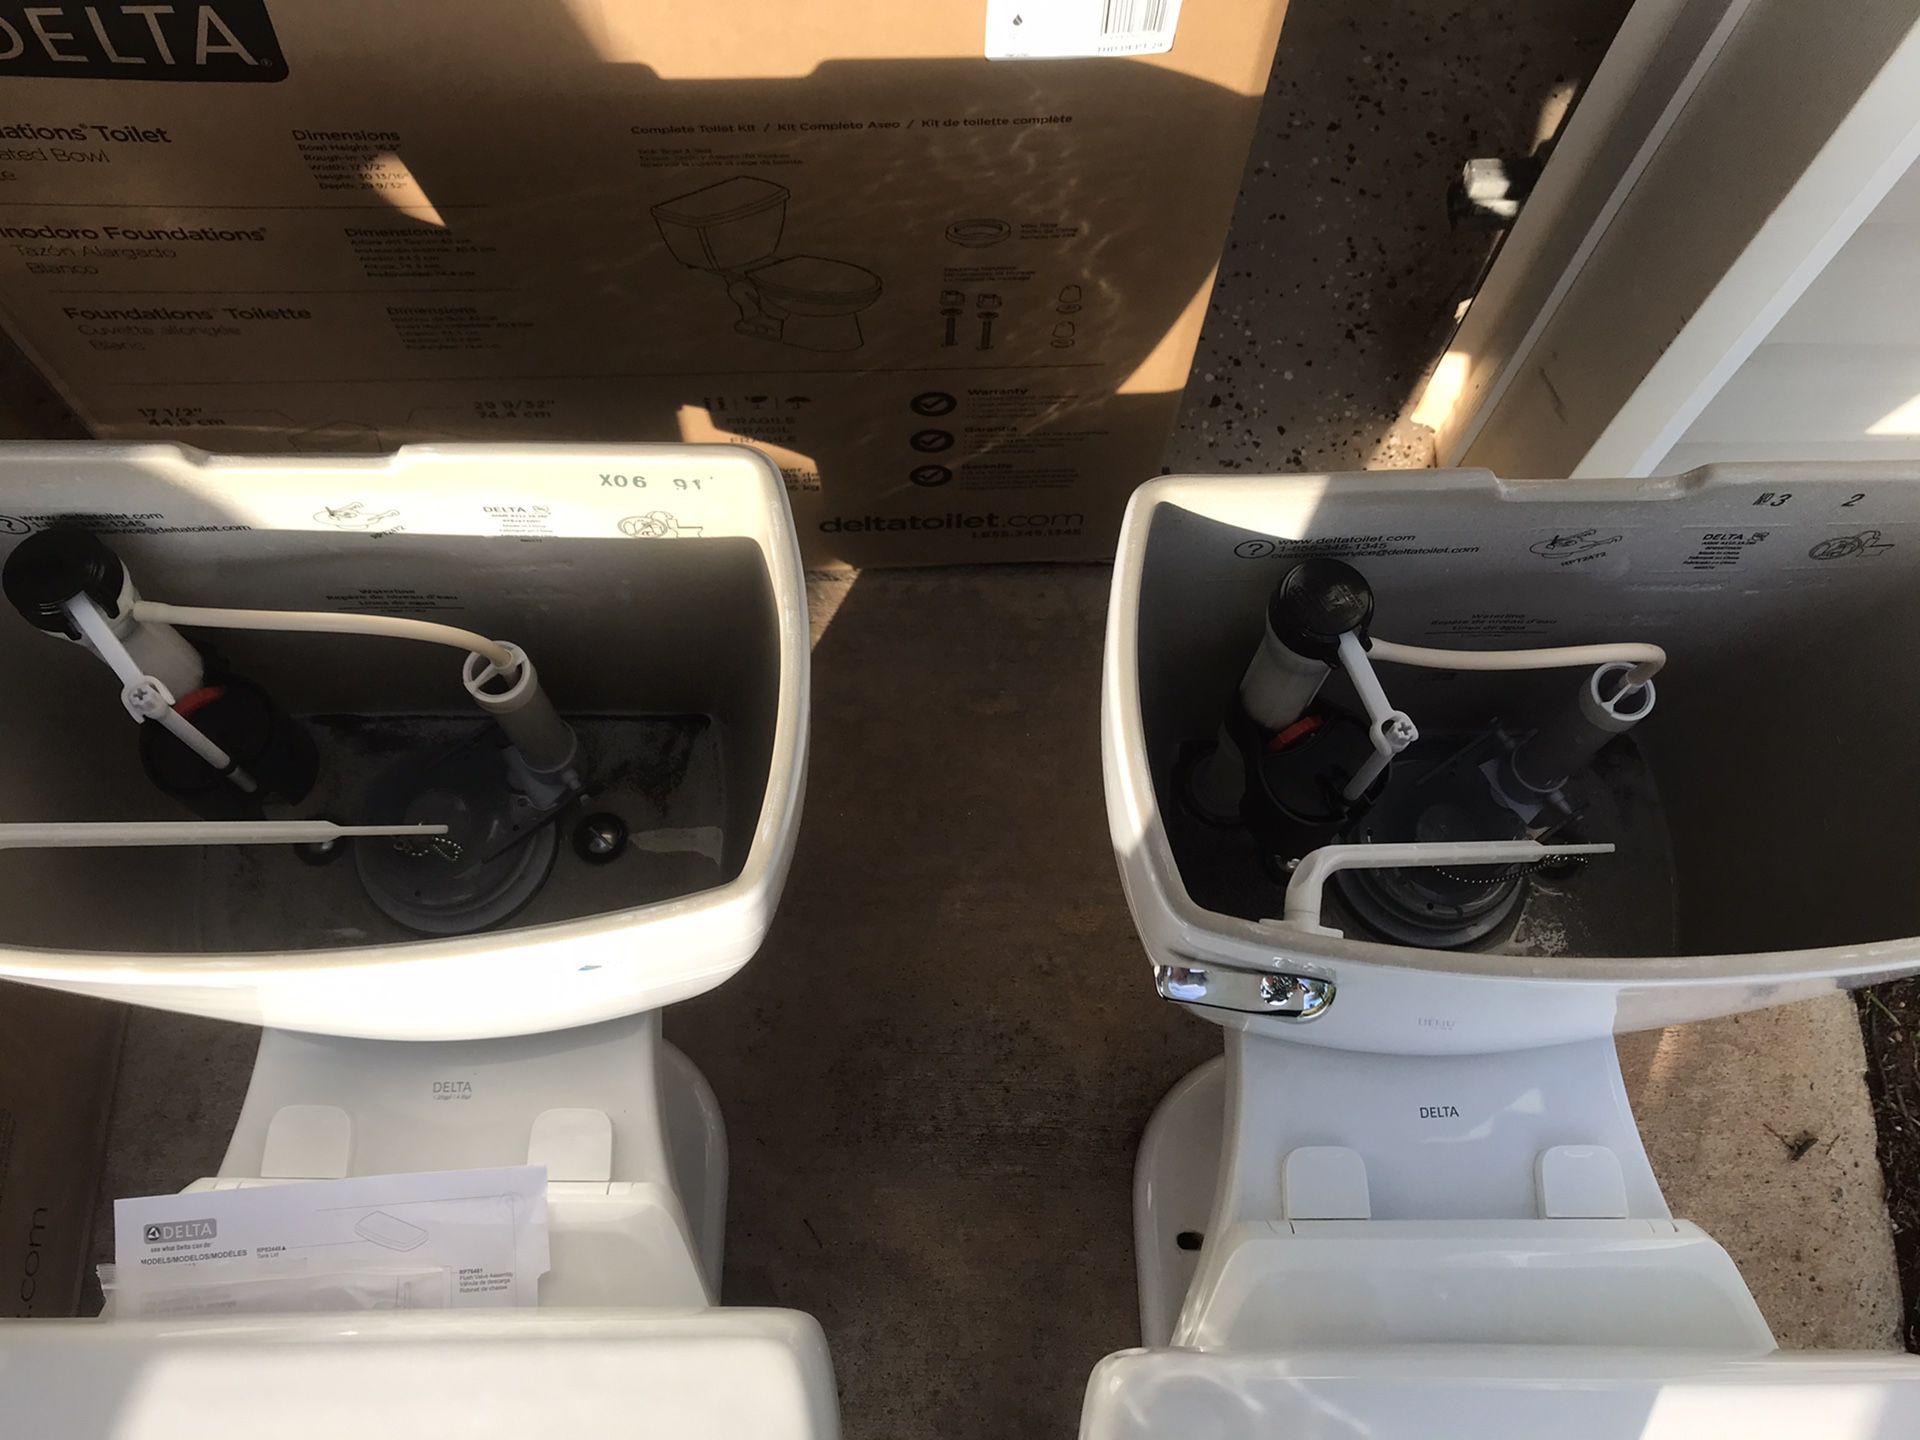 2-delta-toilets-for-sale-in-cleveland-ga-offerup